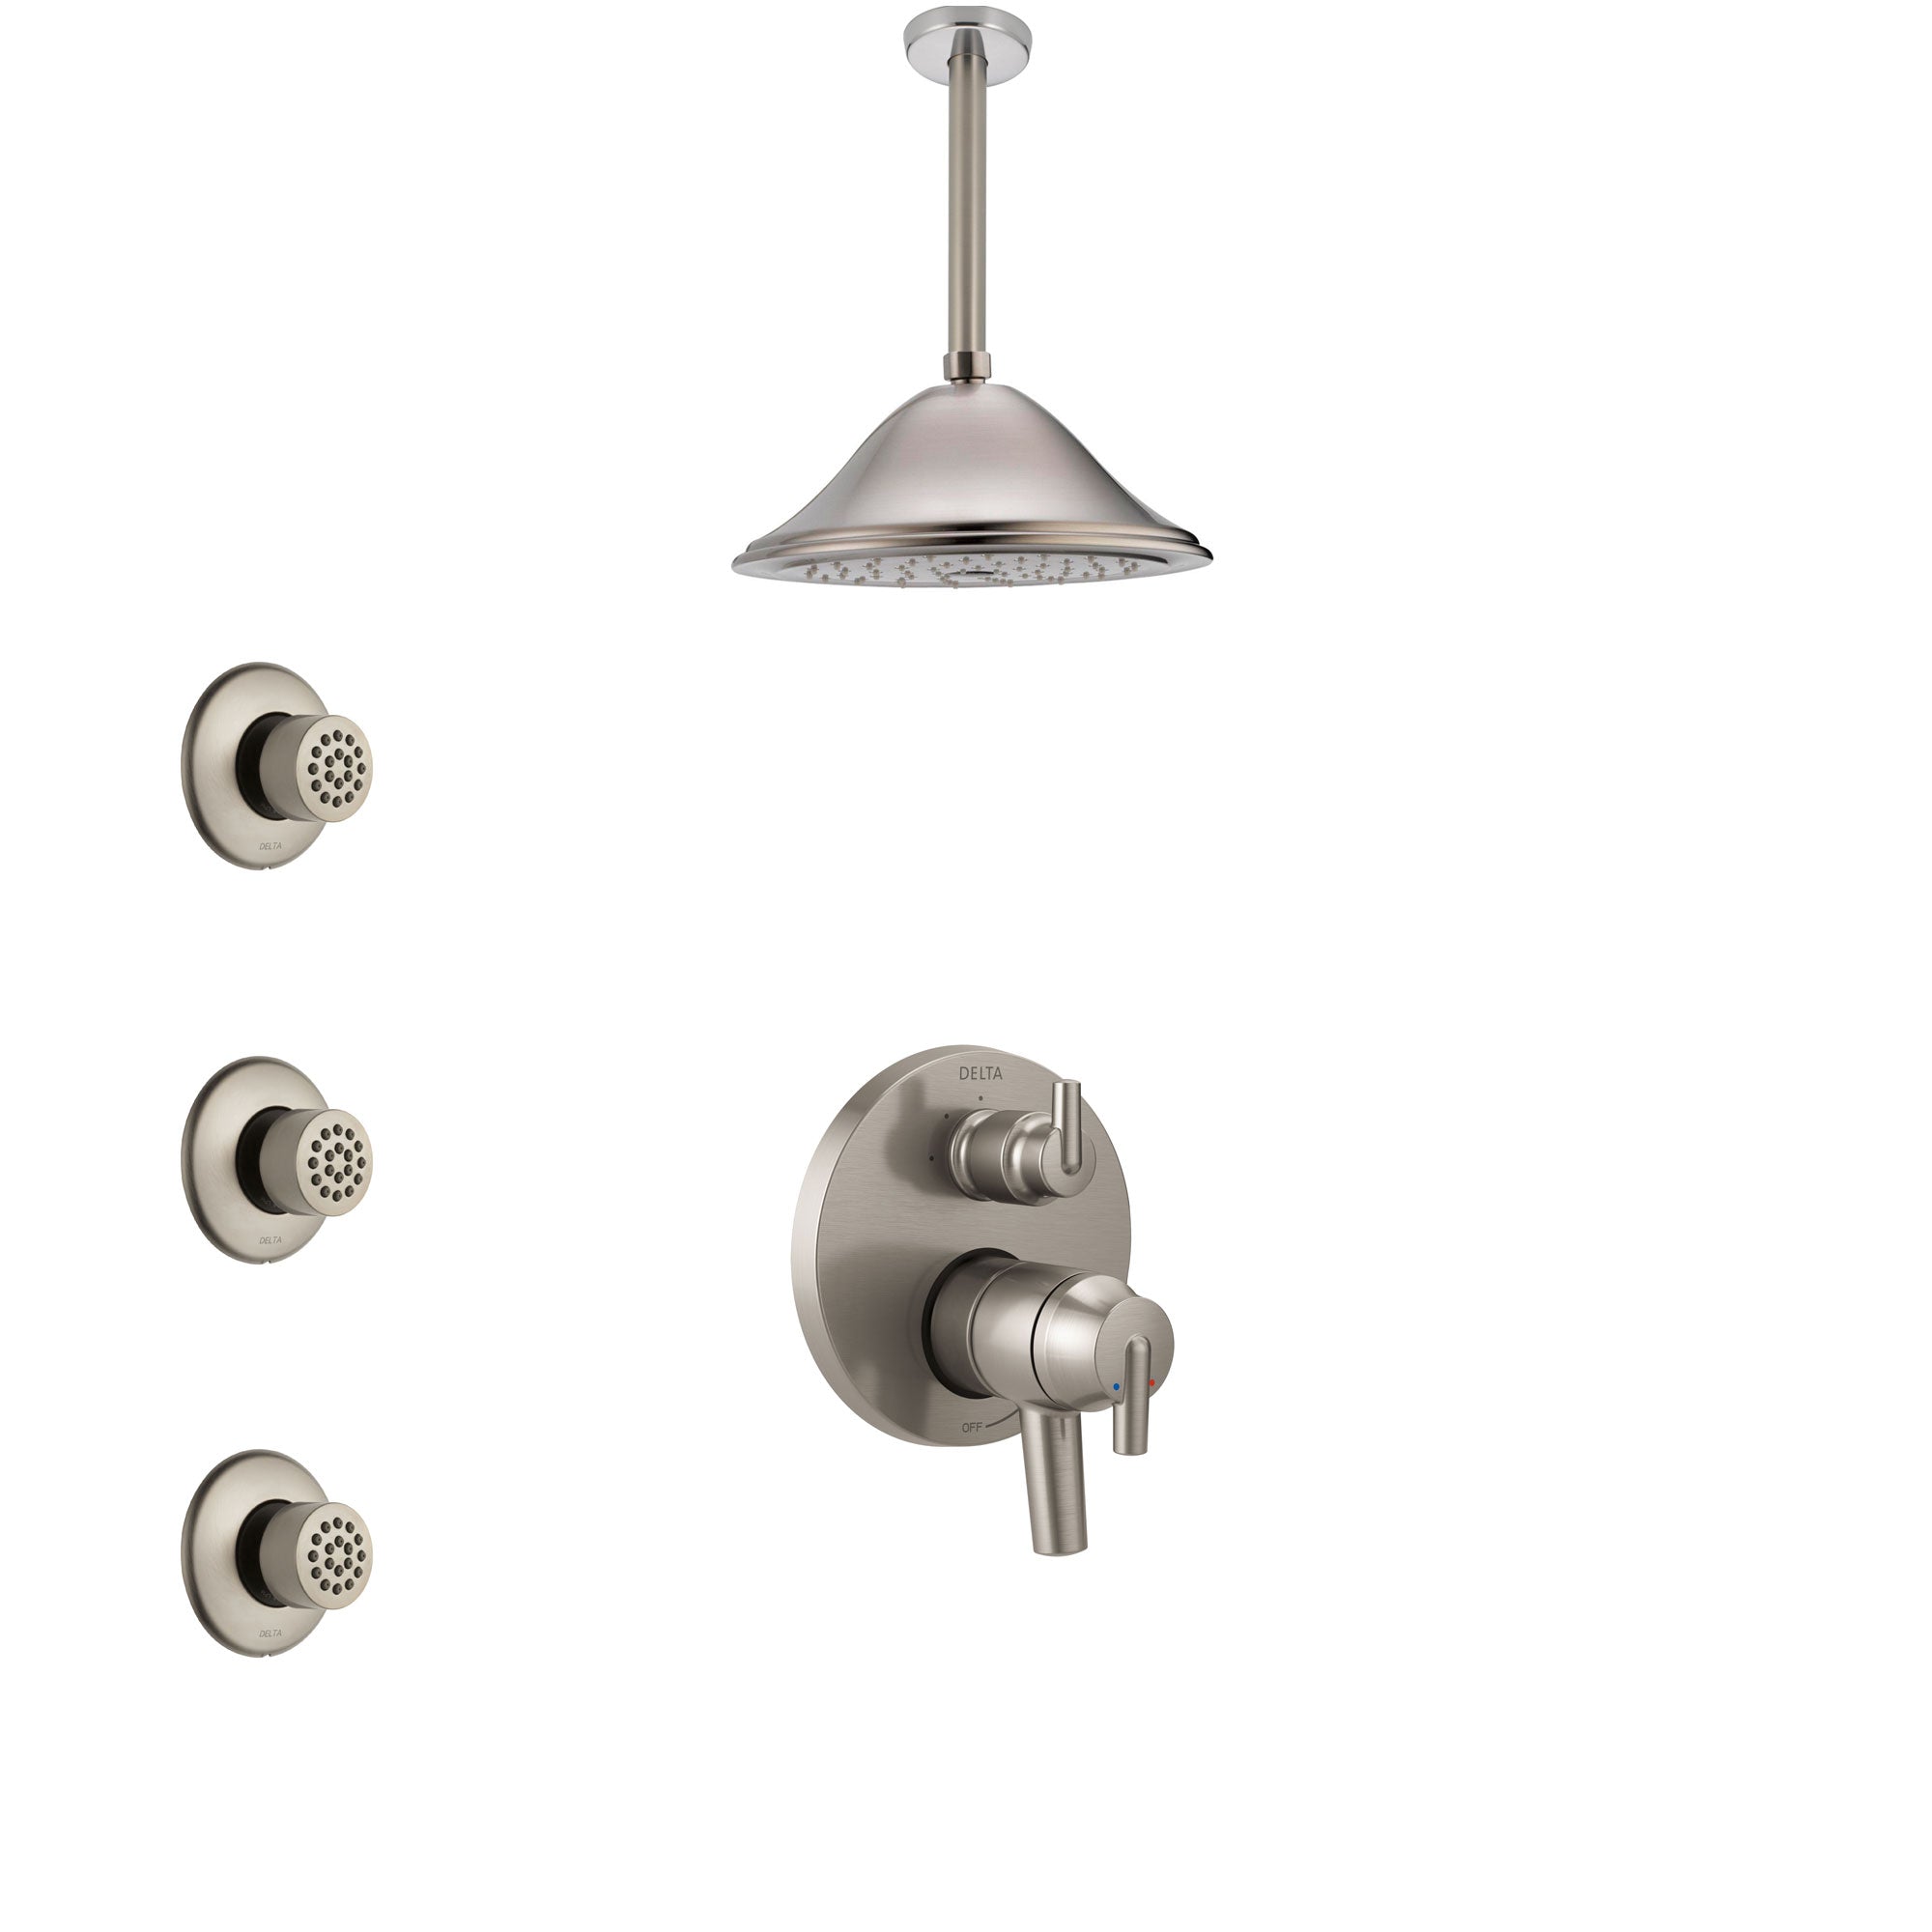 Delta Trinsic Dual Control Handle Stainless Steel Finish Shower System, Integrated Diverter, Ceiling Mount Showerhead, and 3 Body Sprays SS27859SS6